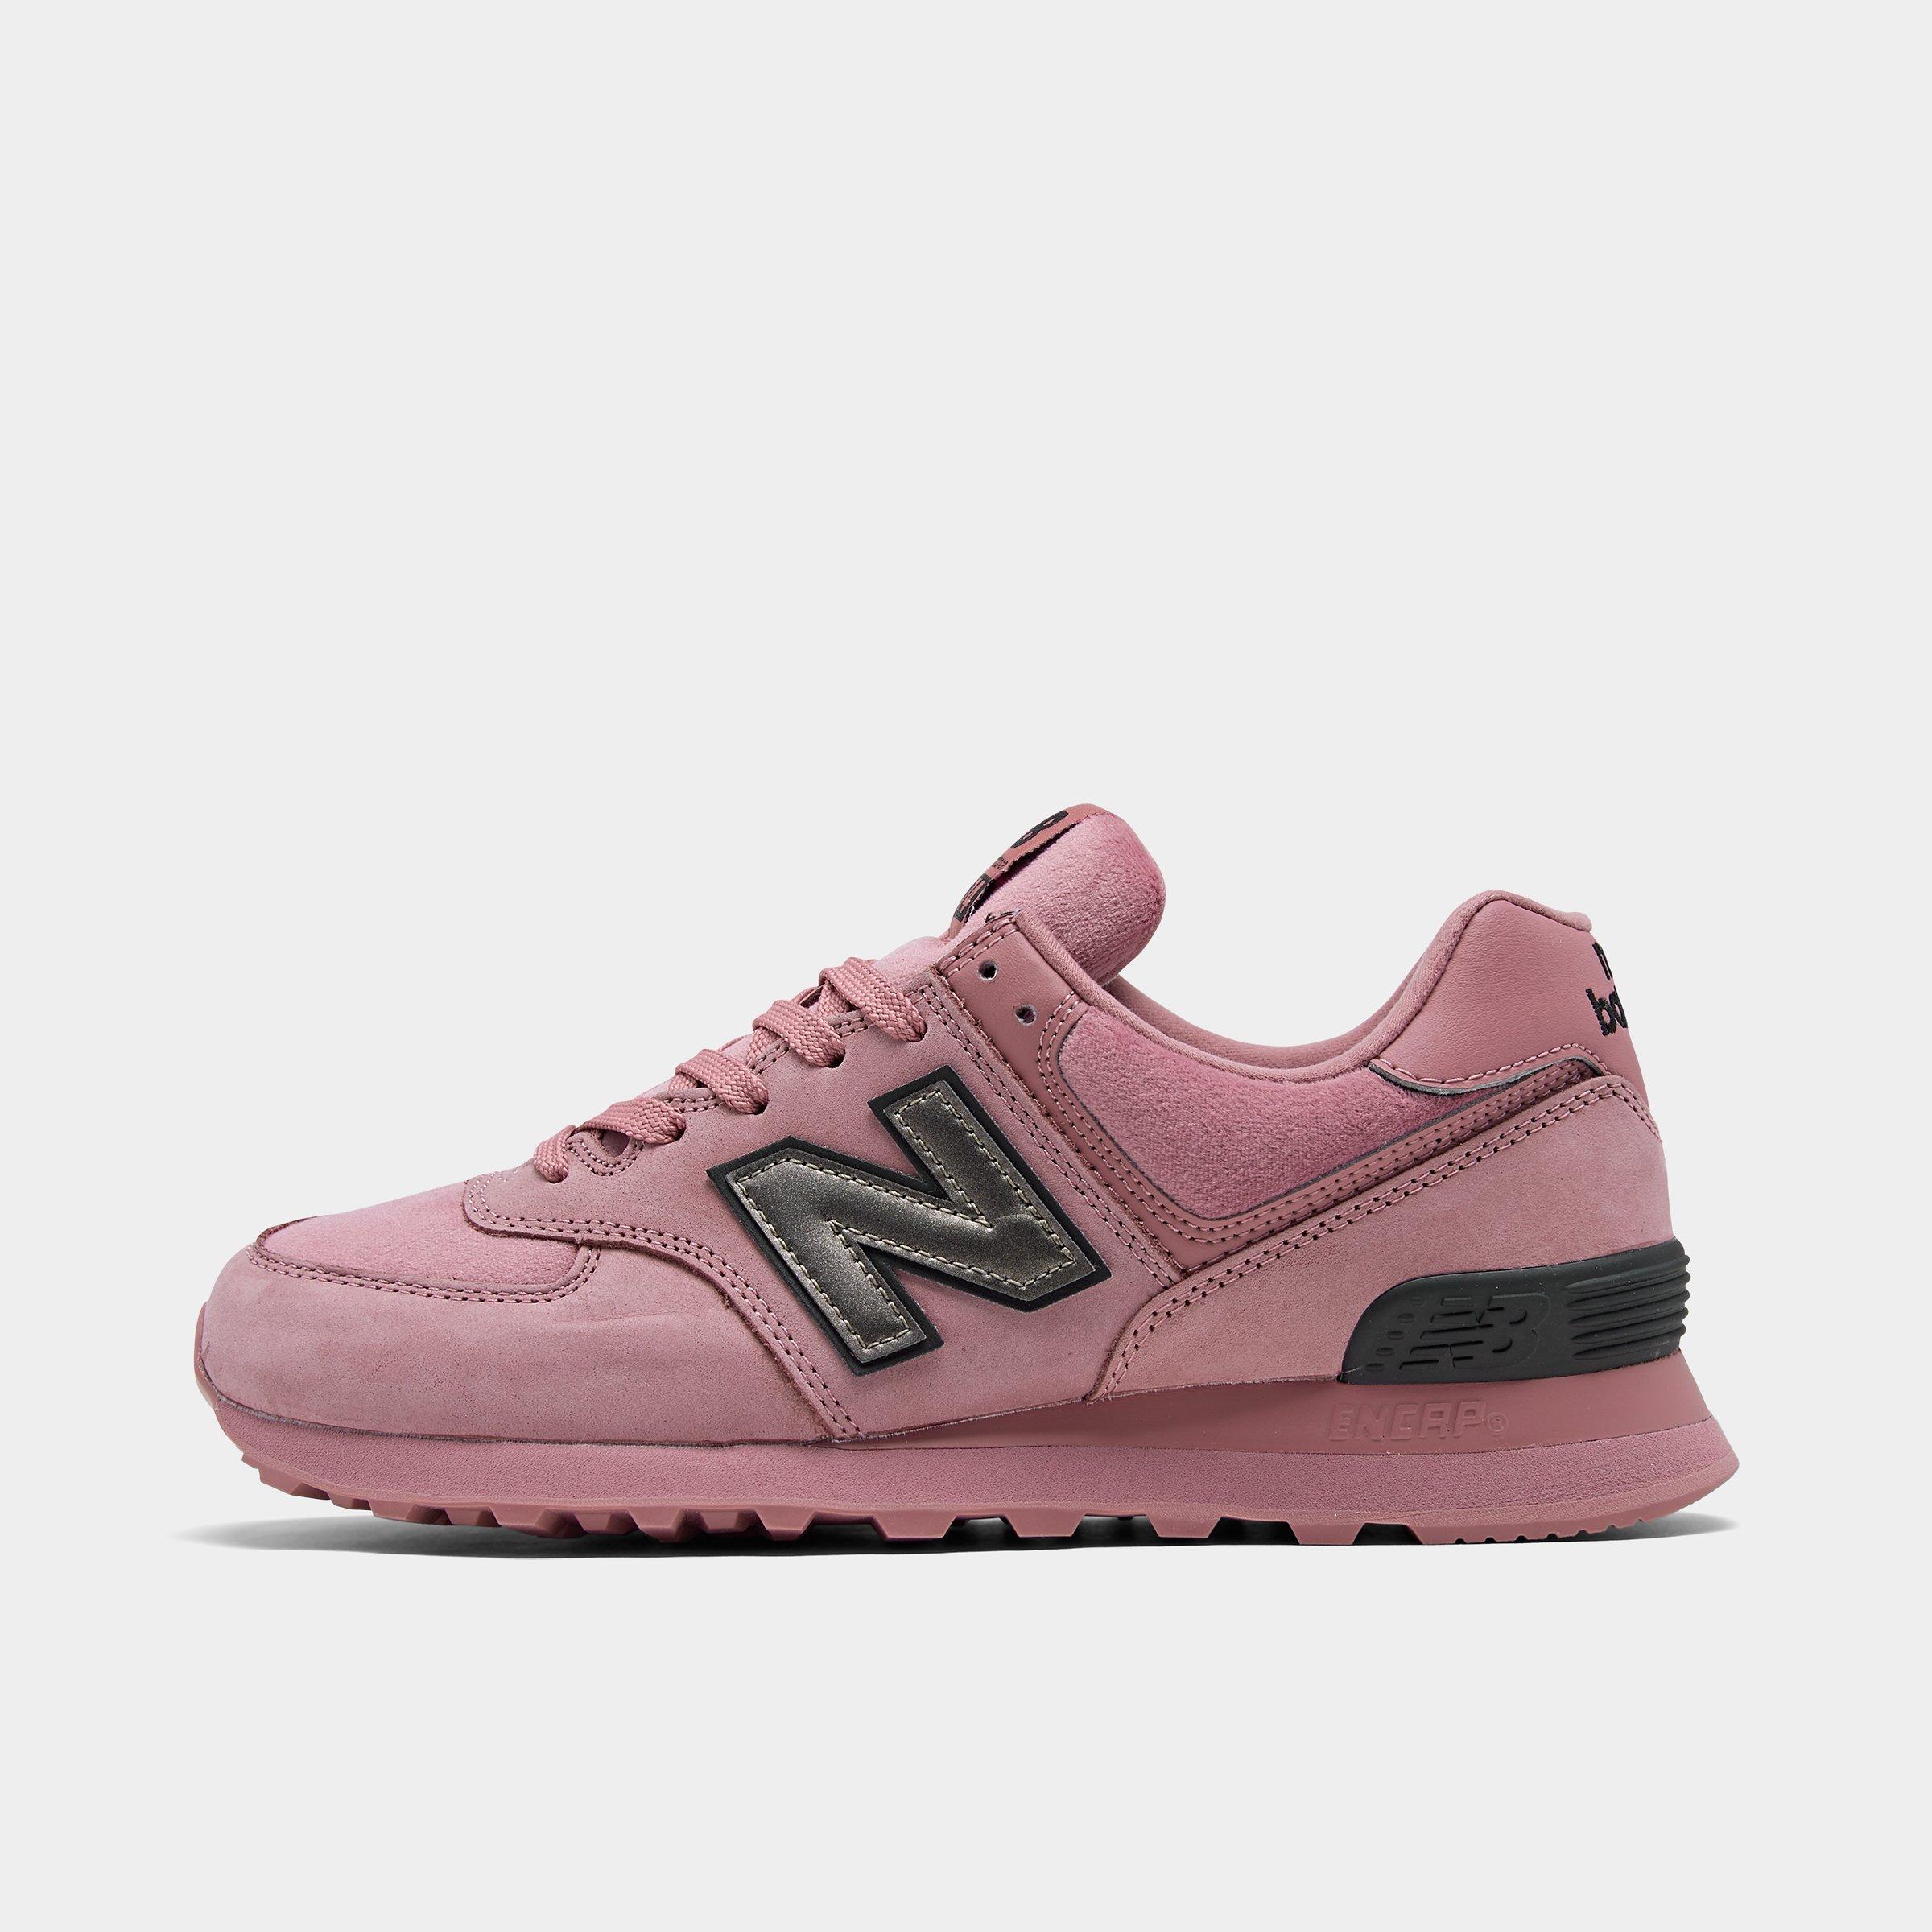 new balance women's 574 casual sneakers